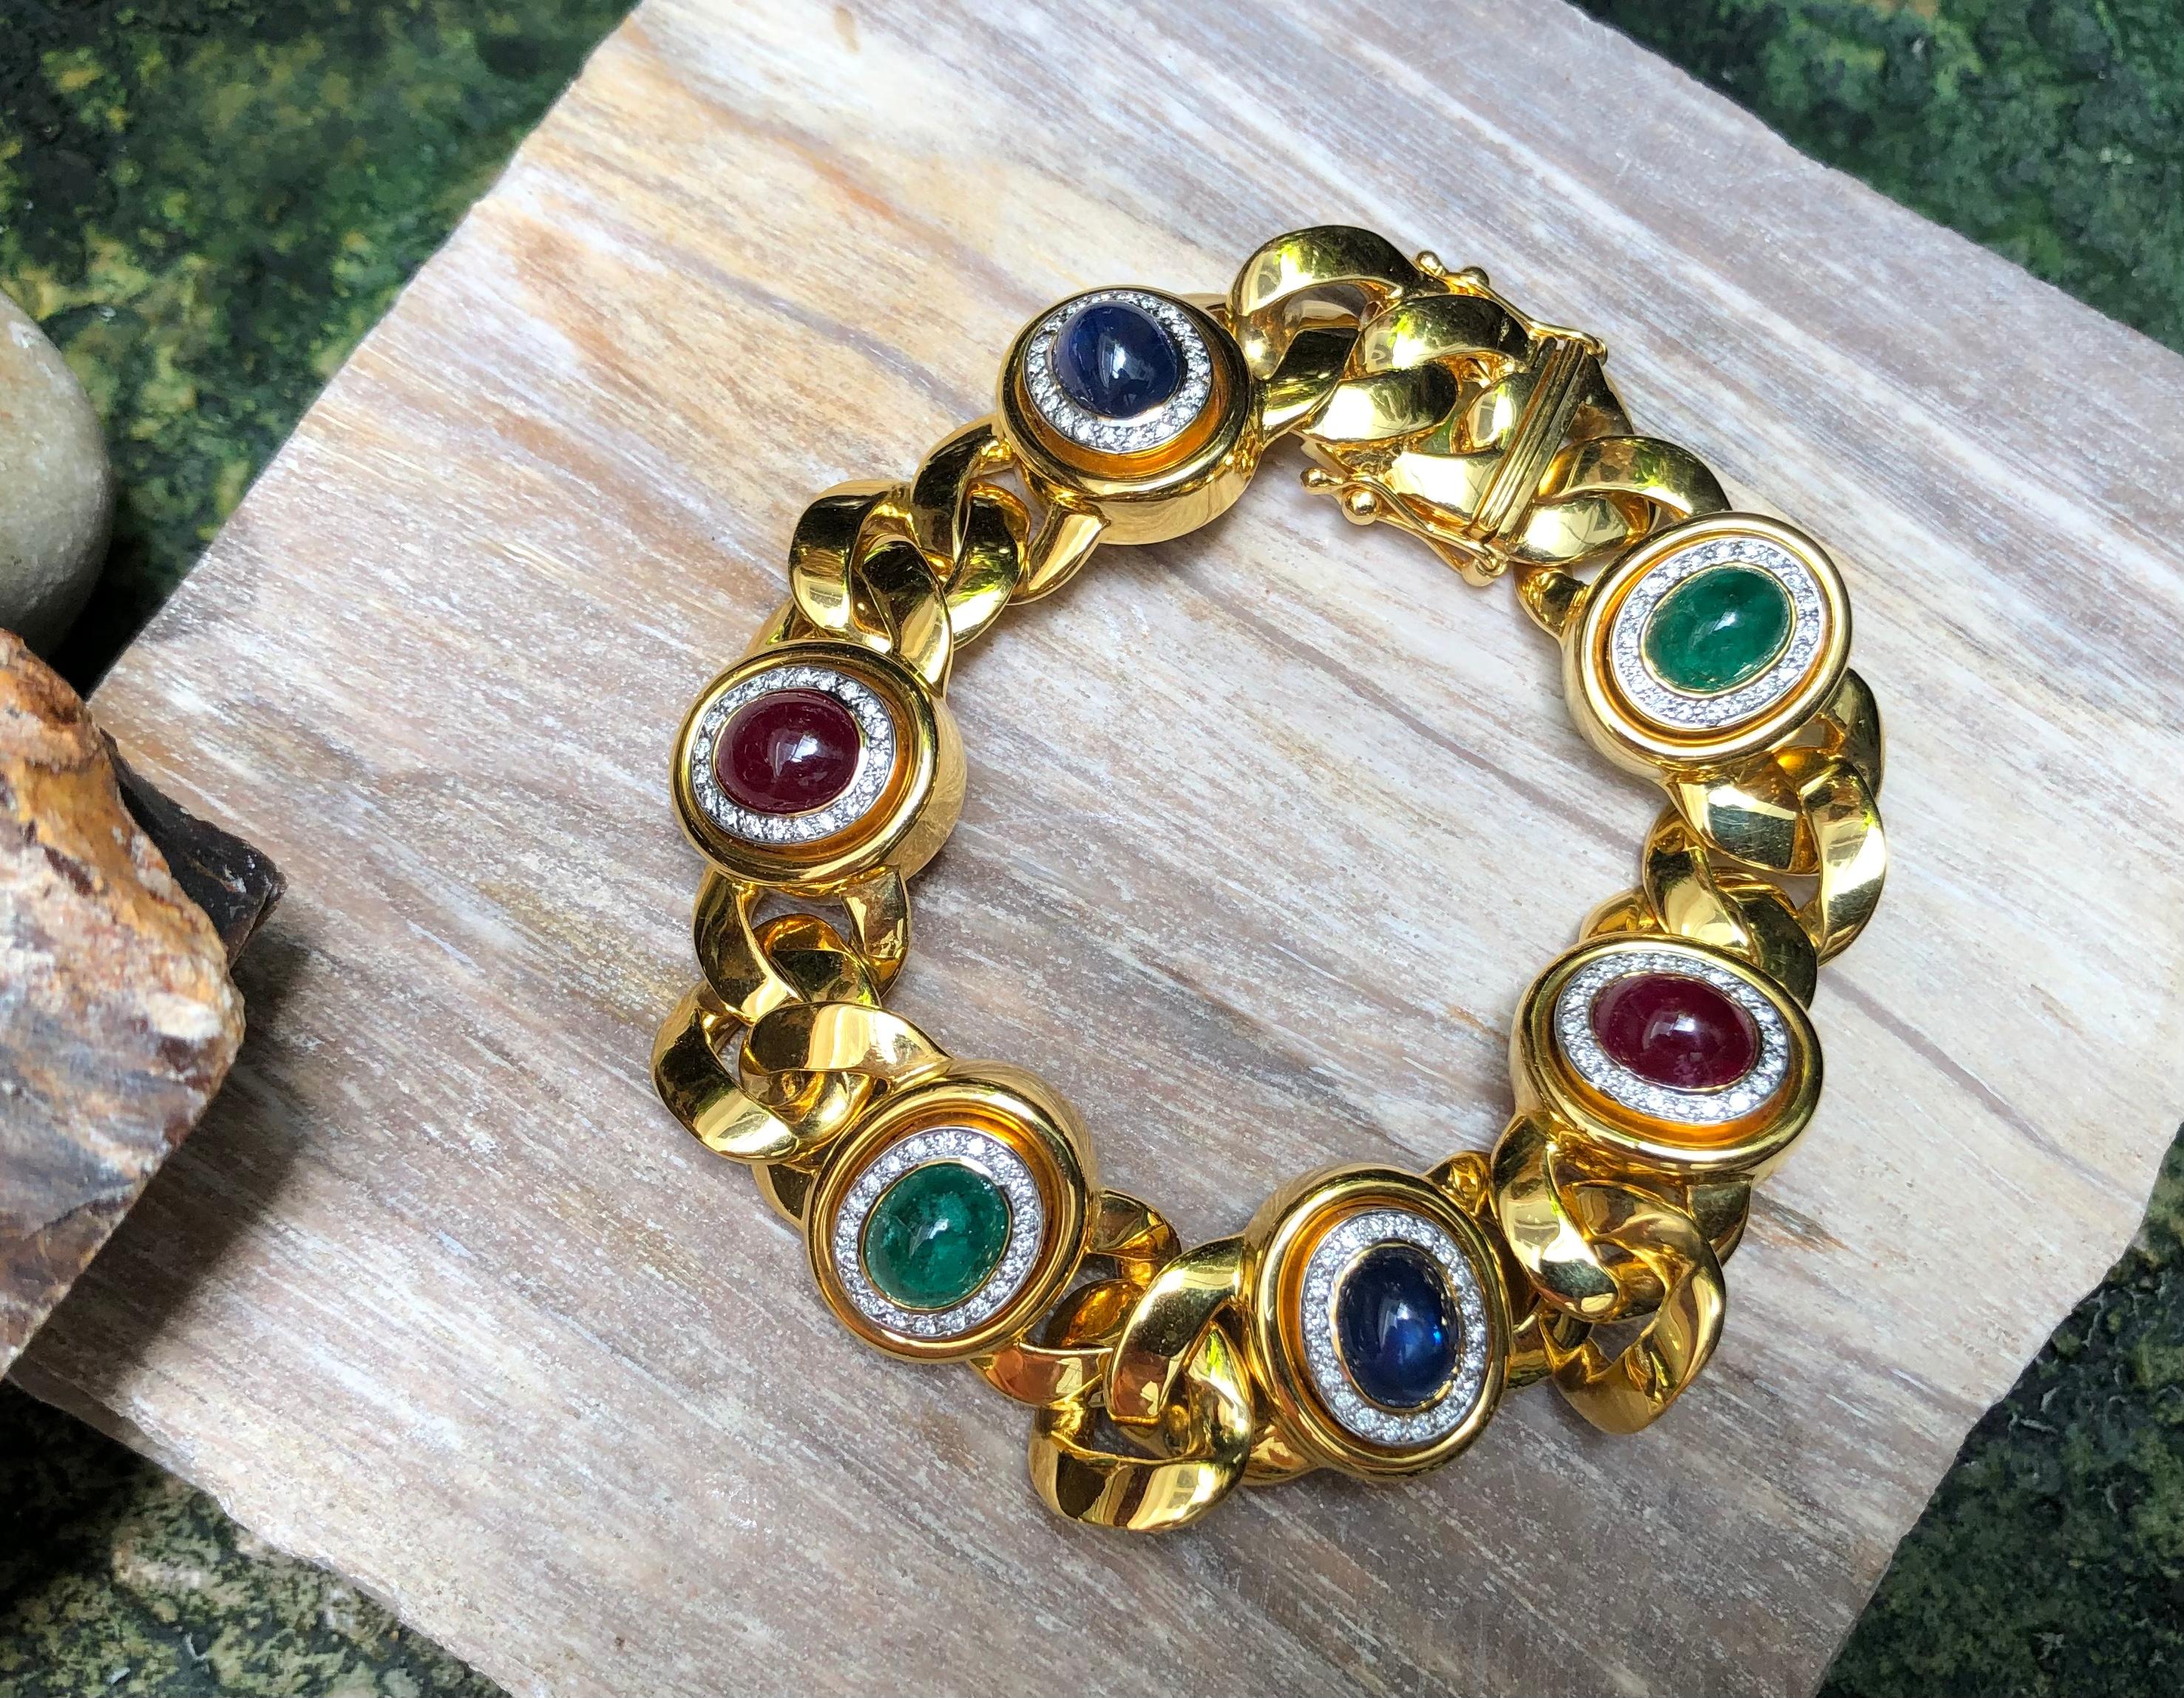 Cabochon Ruby 6.0 carats, Cabochon Blue Sapphire 5.77 carats, Cabochon Emerald 4.17 carats with Diamond 0.90 carat Bracelet set in 18 Karat Gold Settings

Width:  1.8 cm 
Length: 10.3 cm
Total Weight: 105.82 grams

